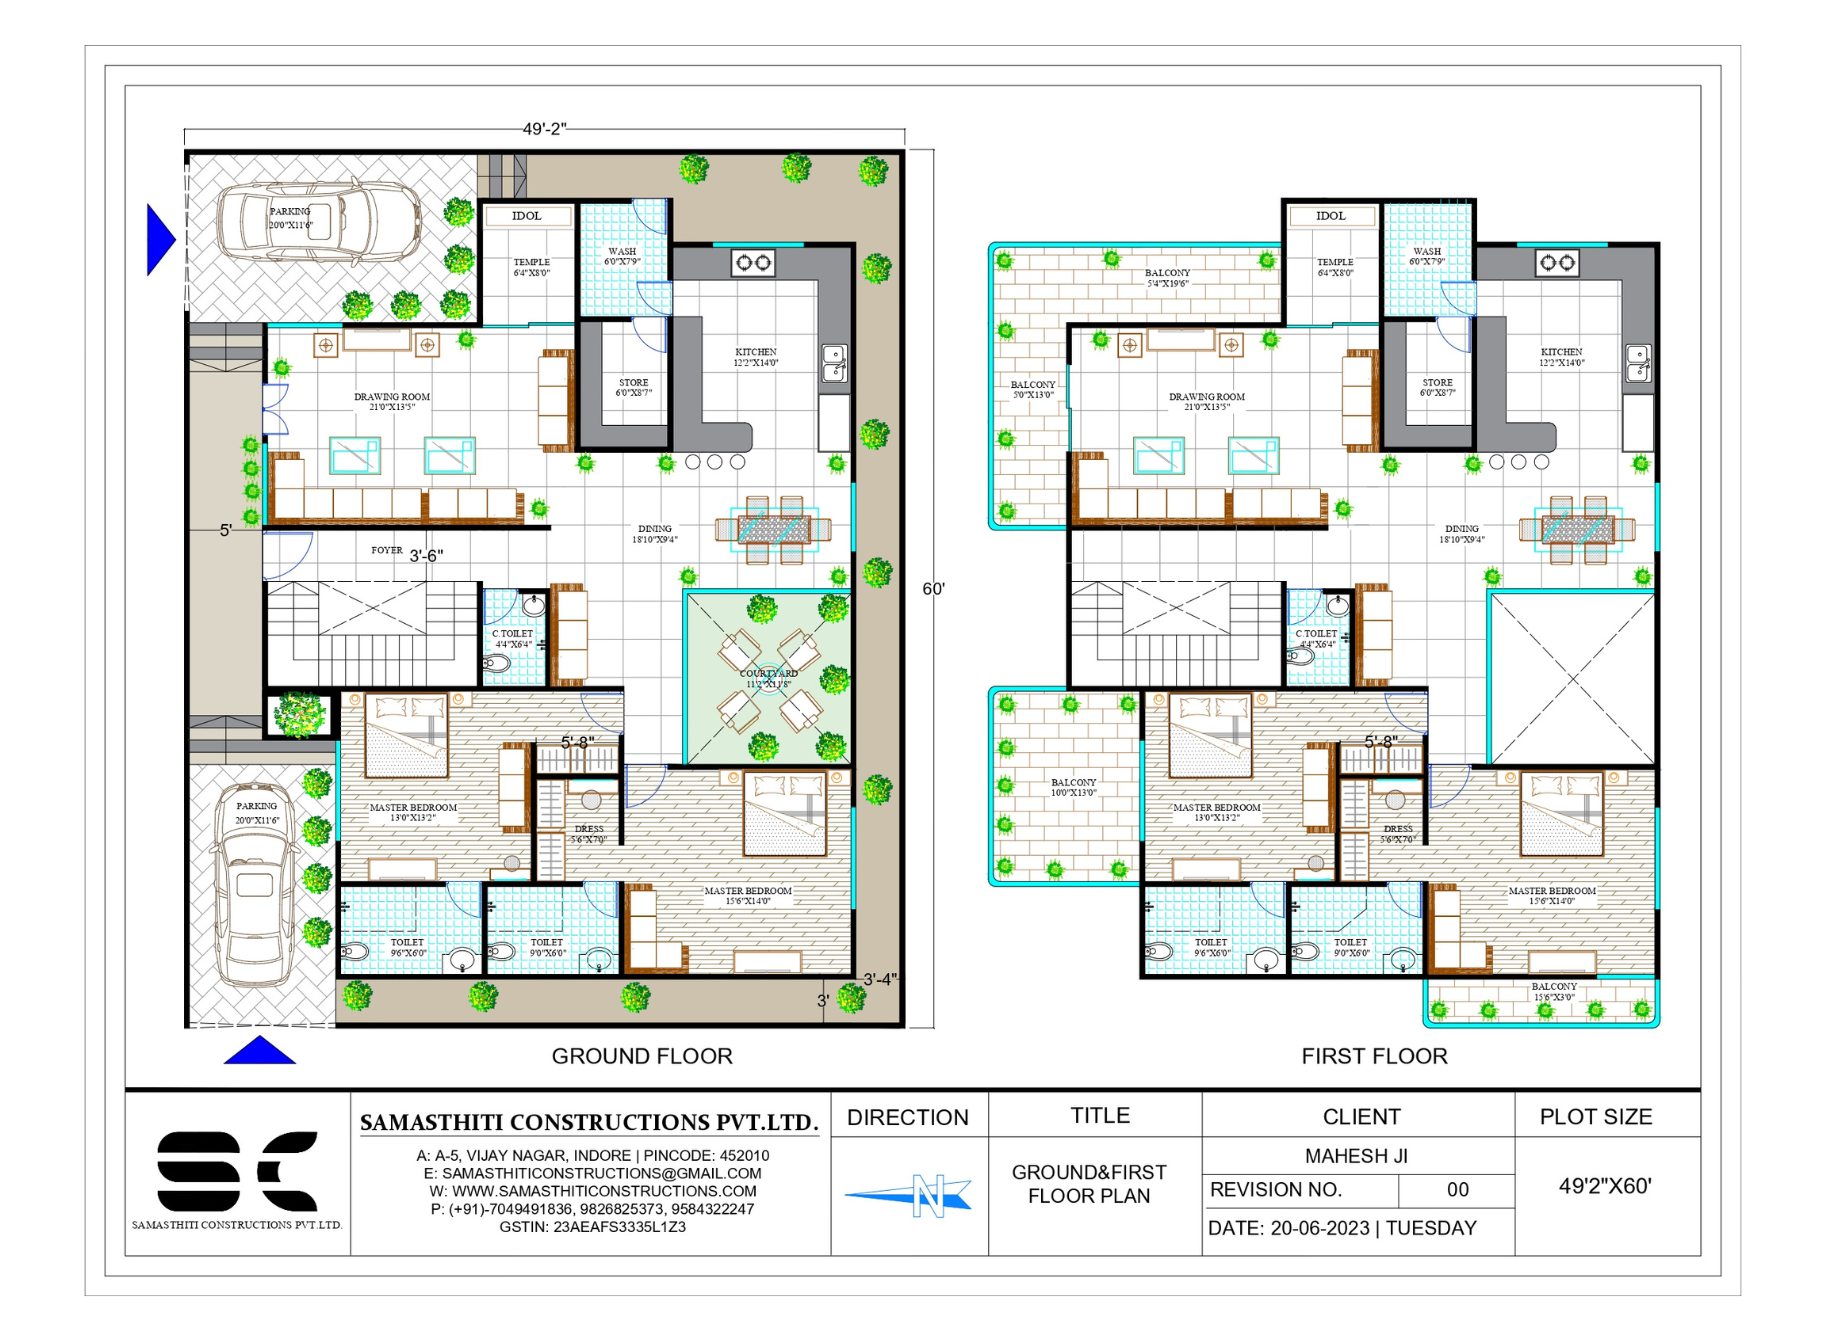 Floor Plan of 60x50 sq.ft. House at Indore